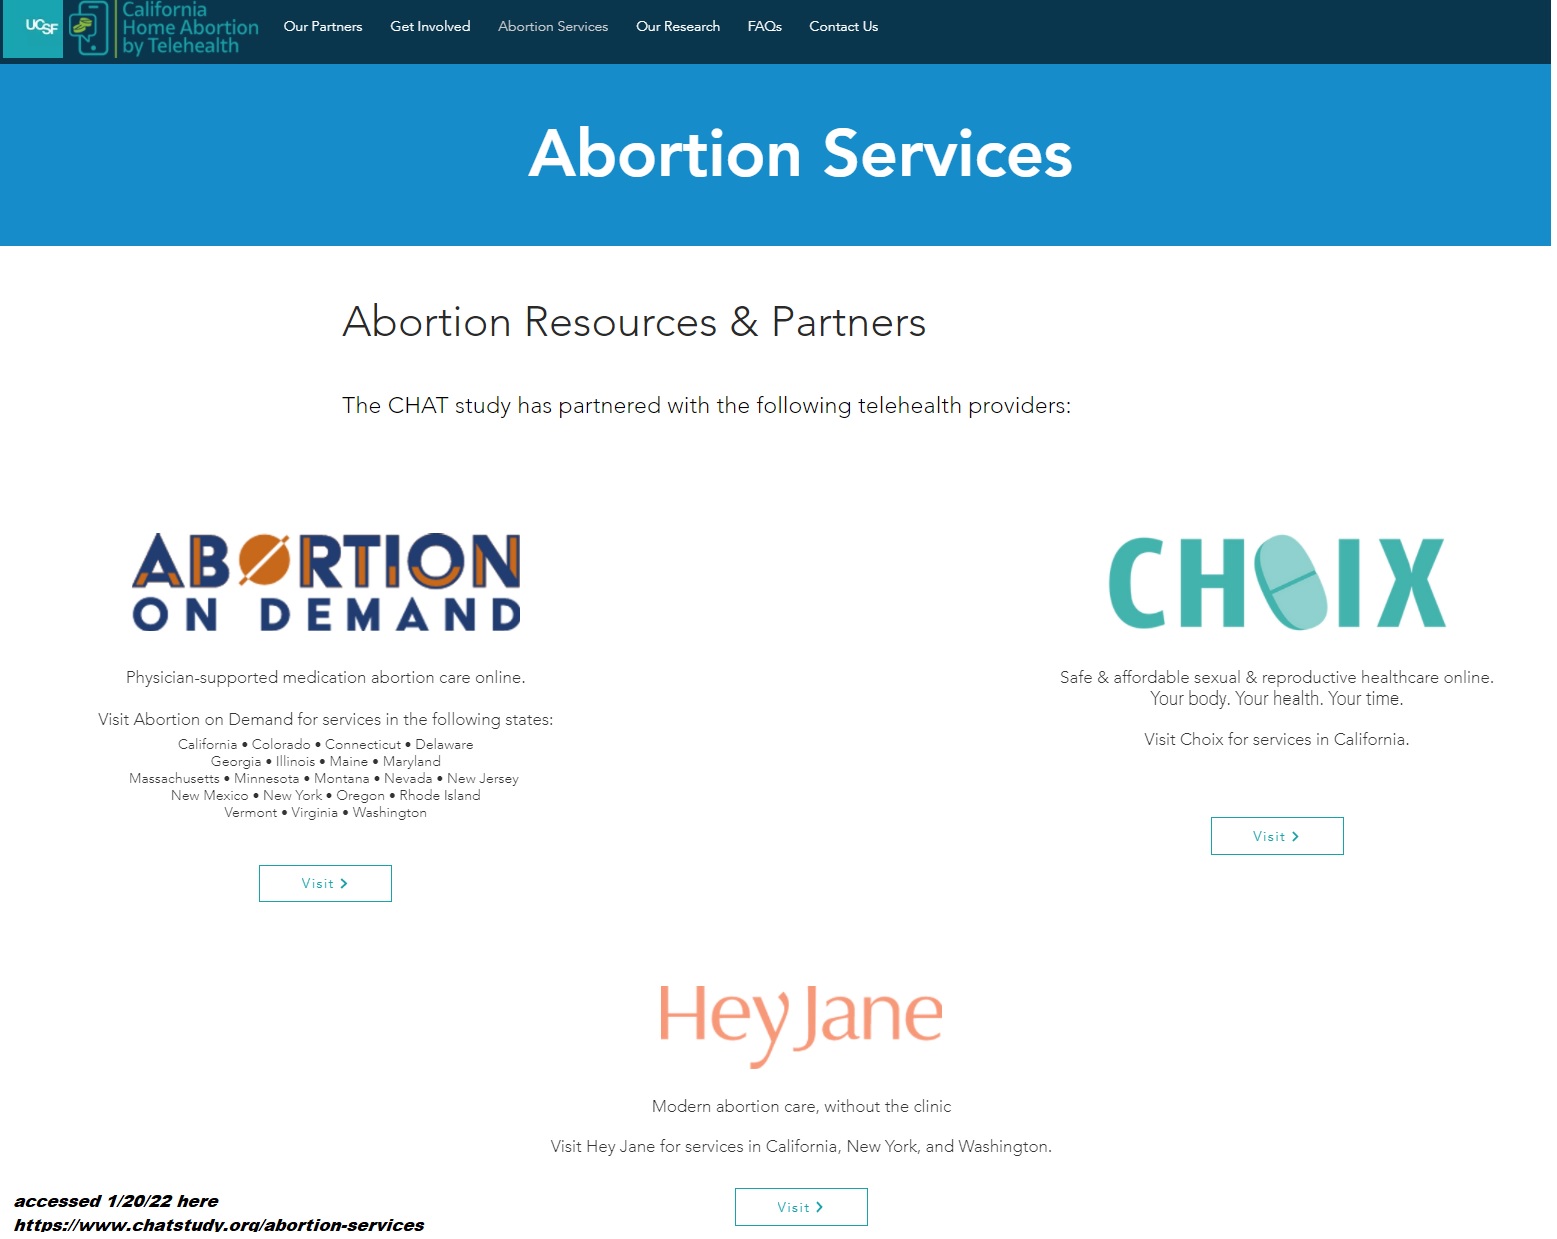 Image: UCSF partners with virtual abortion pill websites AOF Choix and Hey Jane for CHAT study